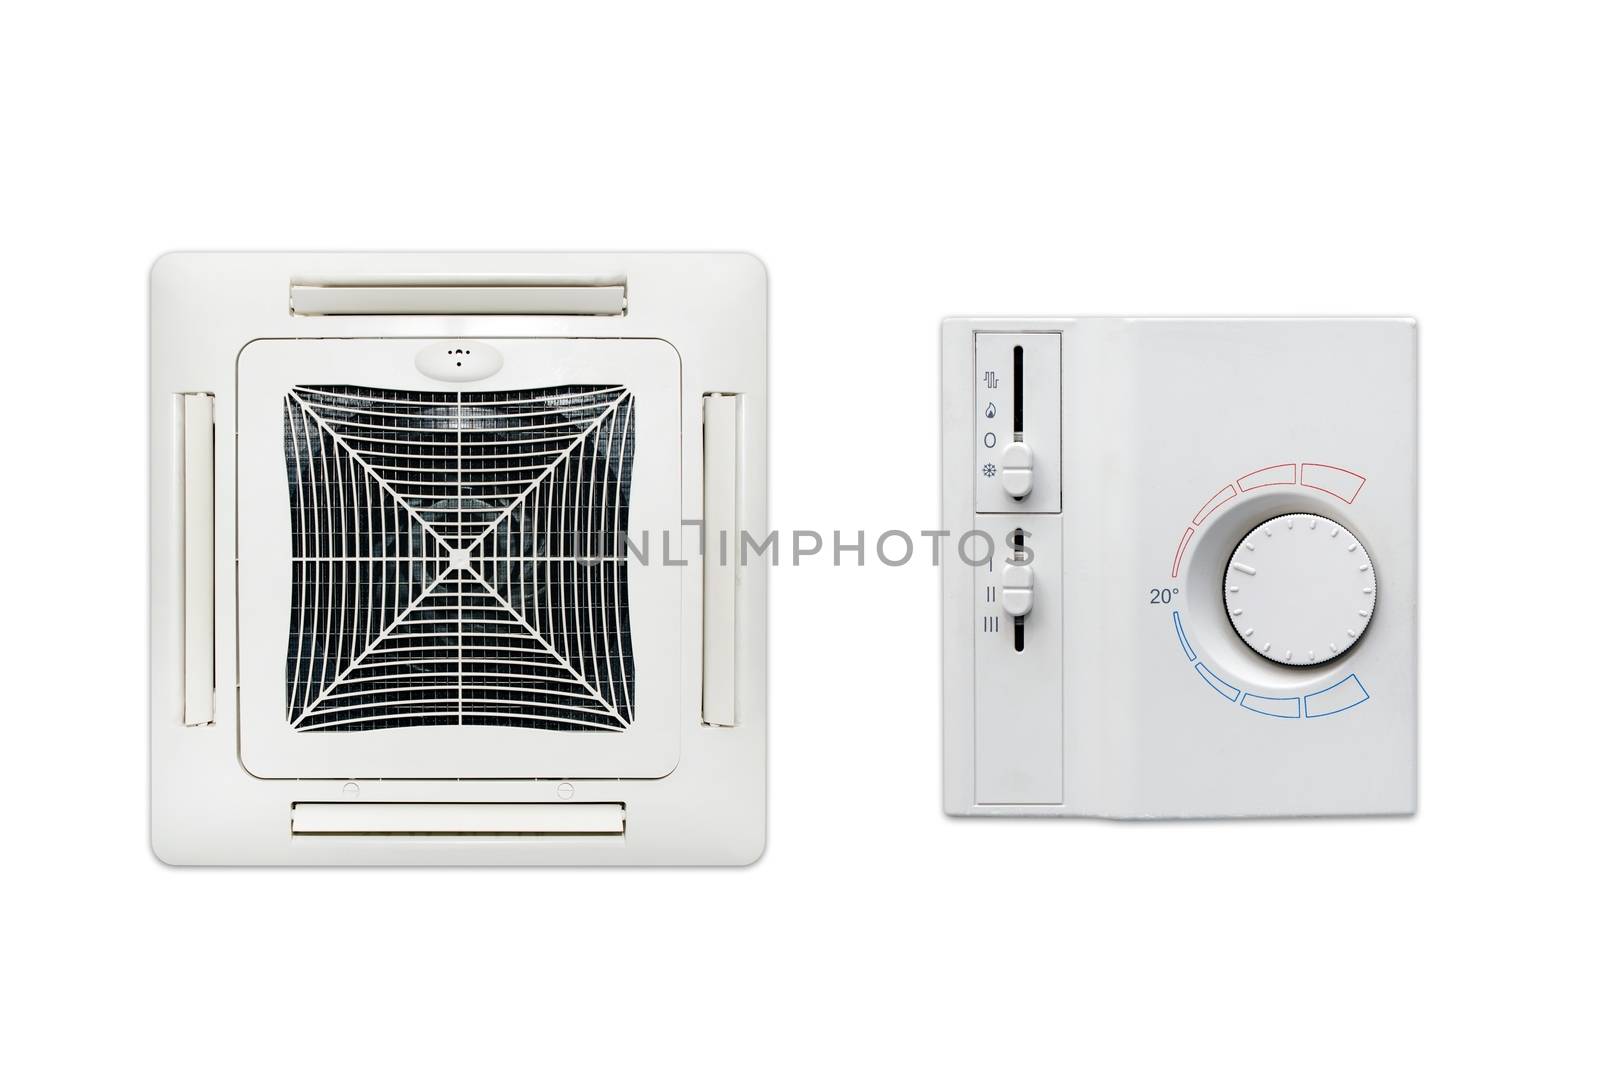 Ceiling air conditioner and thermostat set isolated on white bac by simpson33